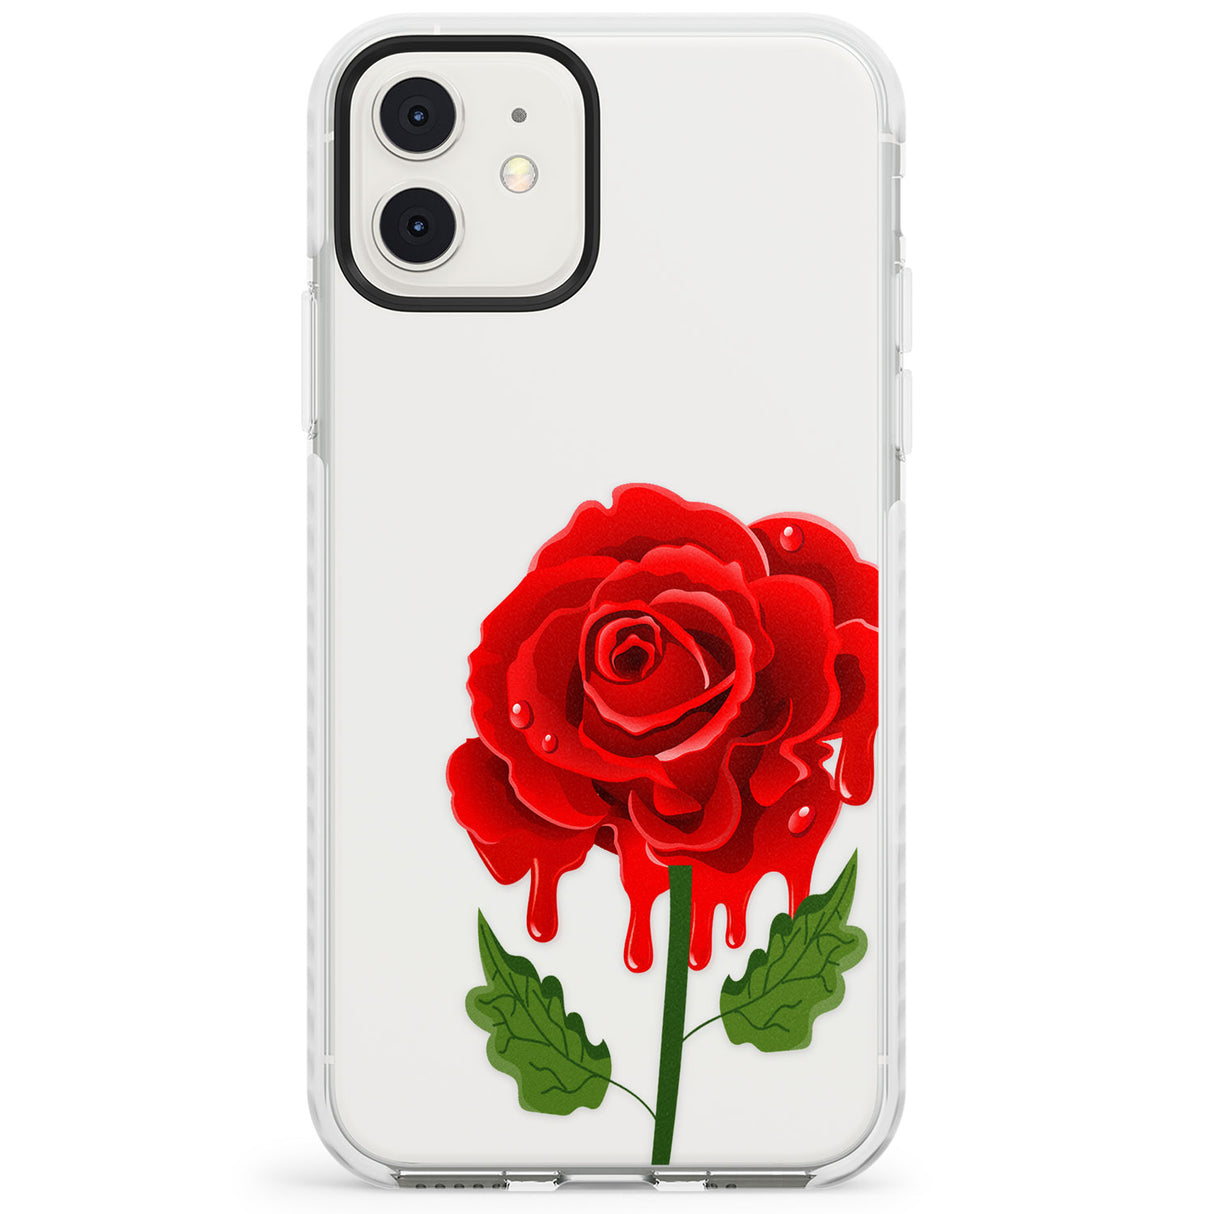 Melting Rose Impact Phone Case for iPhone 11, iphone 12